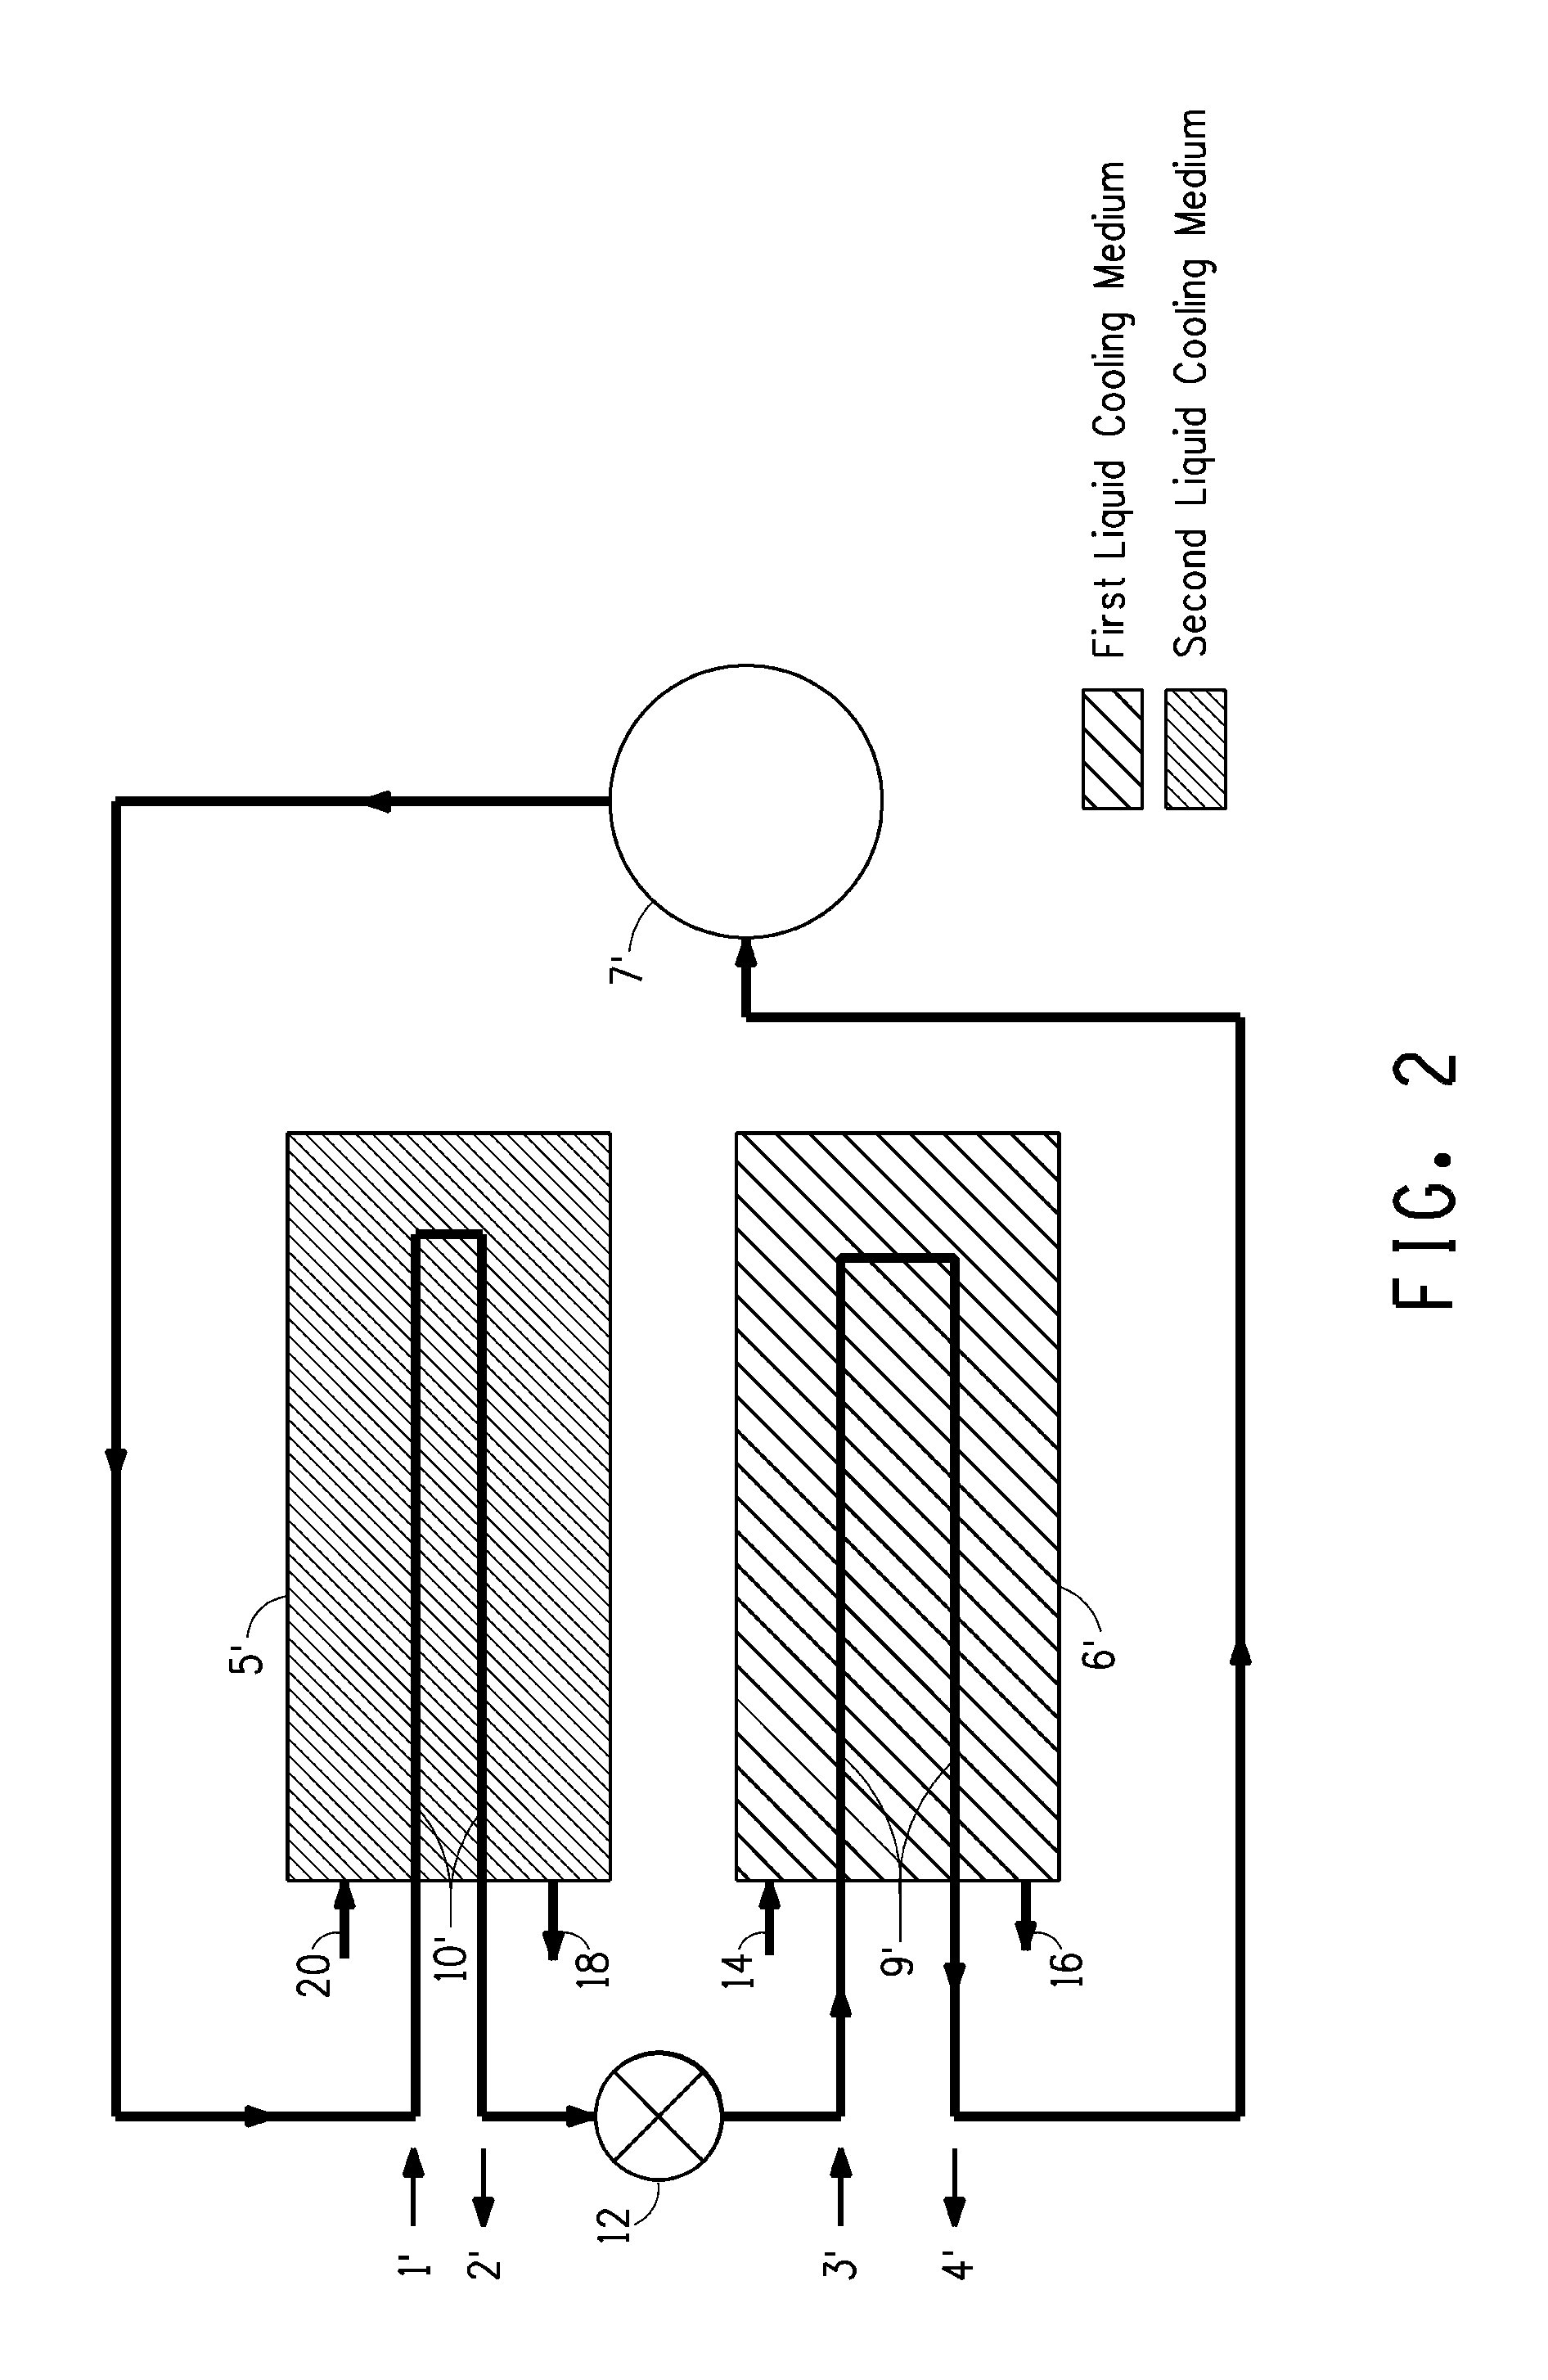 Chiller apparatus containing cis-1,1,1,4,4,4-hexafluoro-2-butene and methods of producing cooling therein